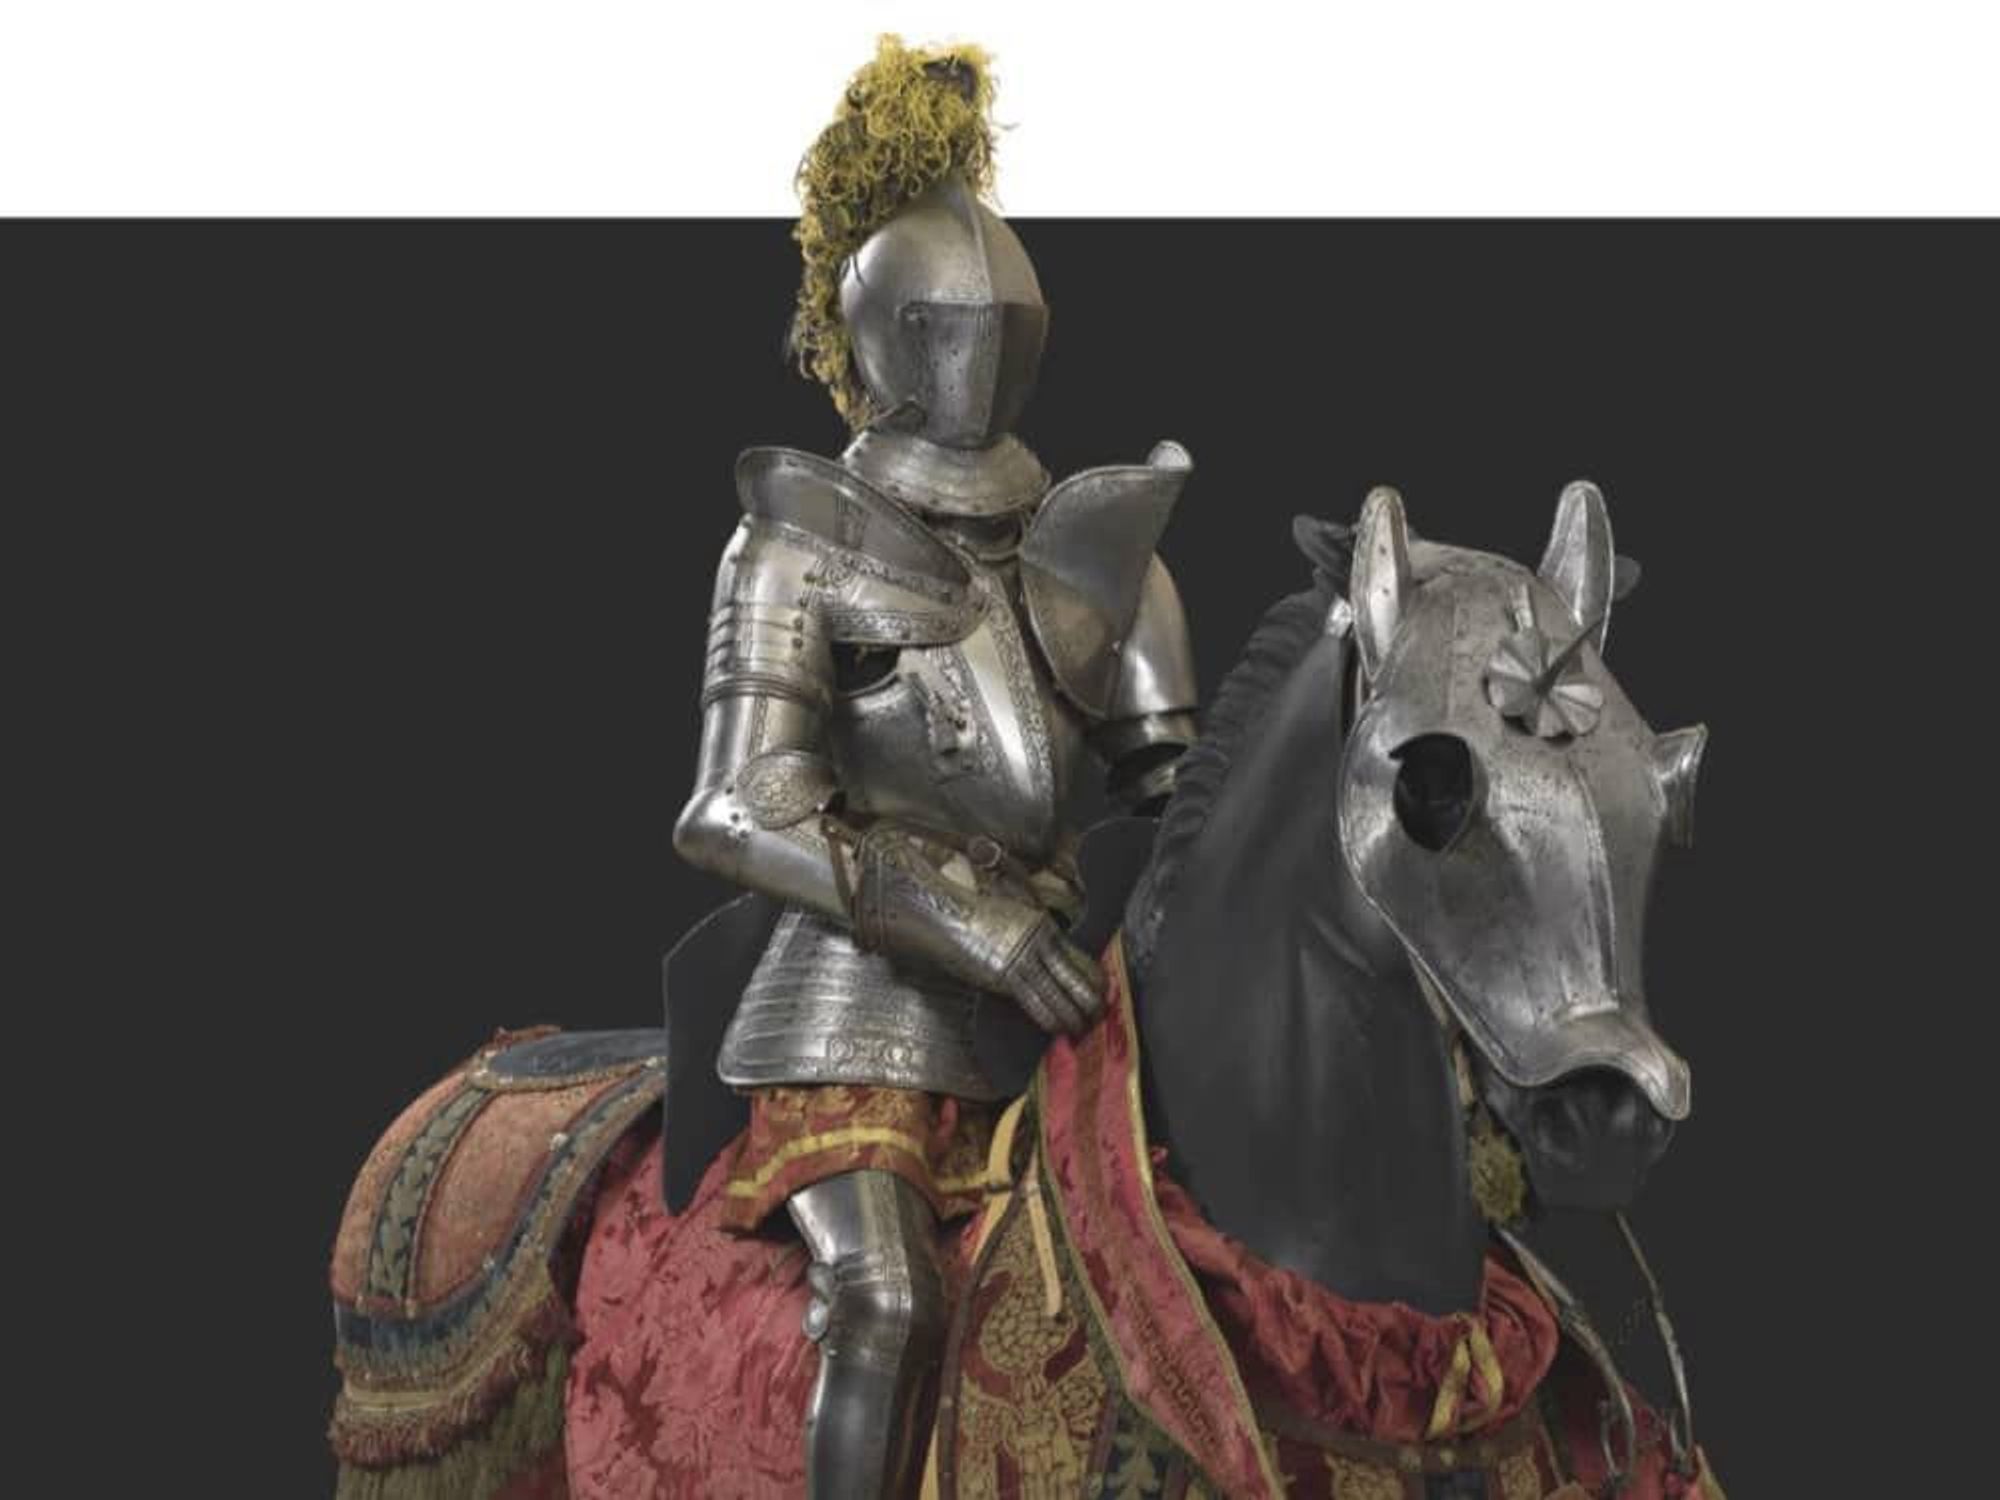 Suit of armor, Northern Italian manufacture, First half of 16th century, Steel, leather, fabric